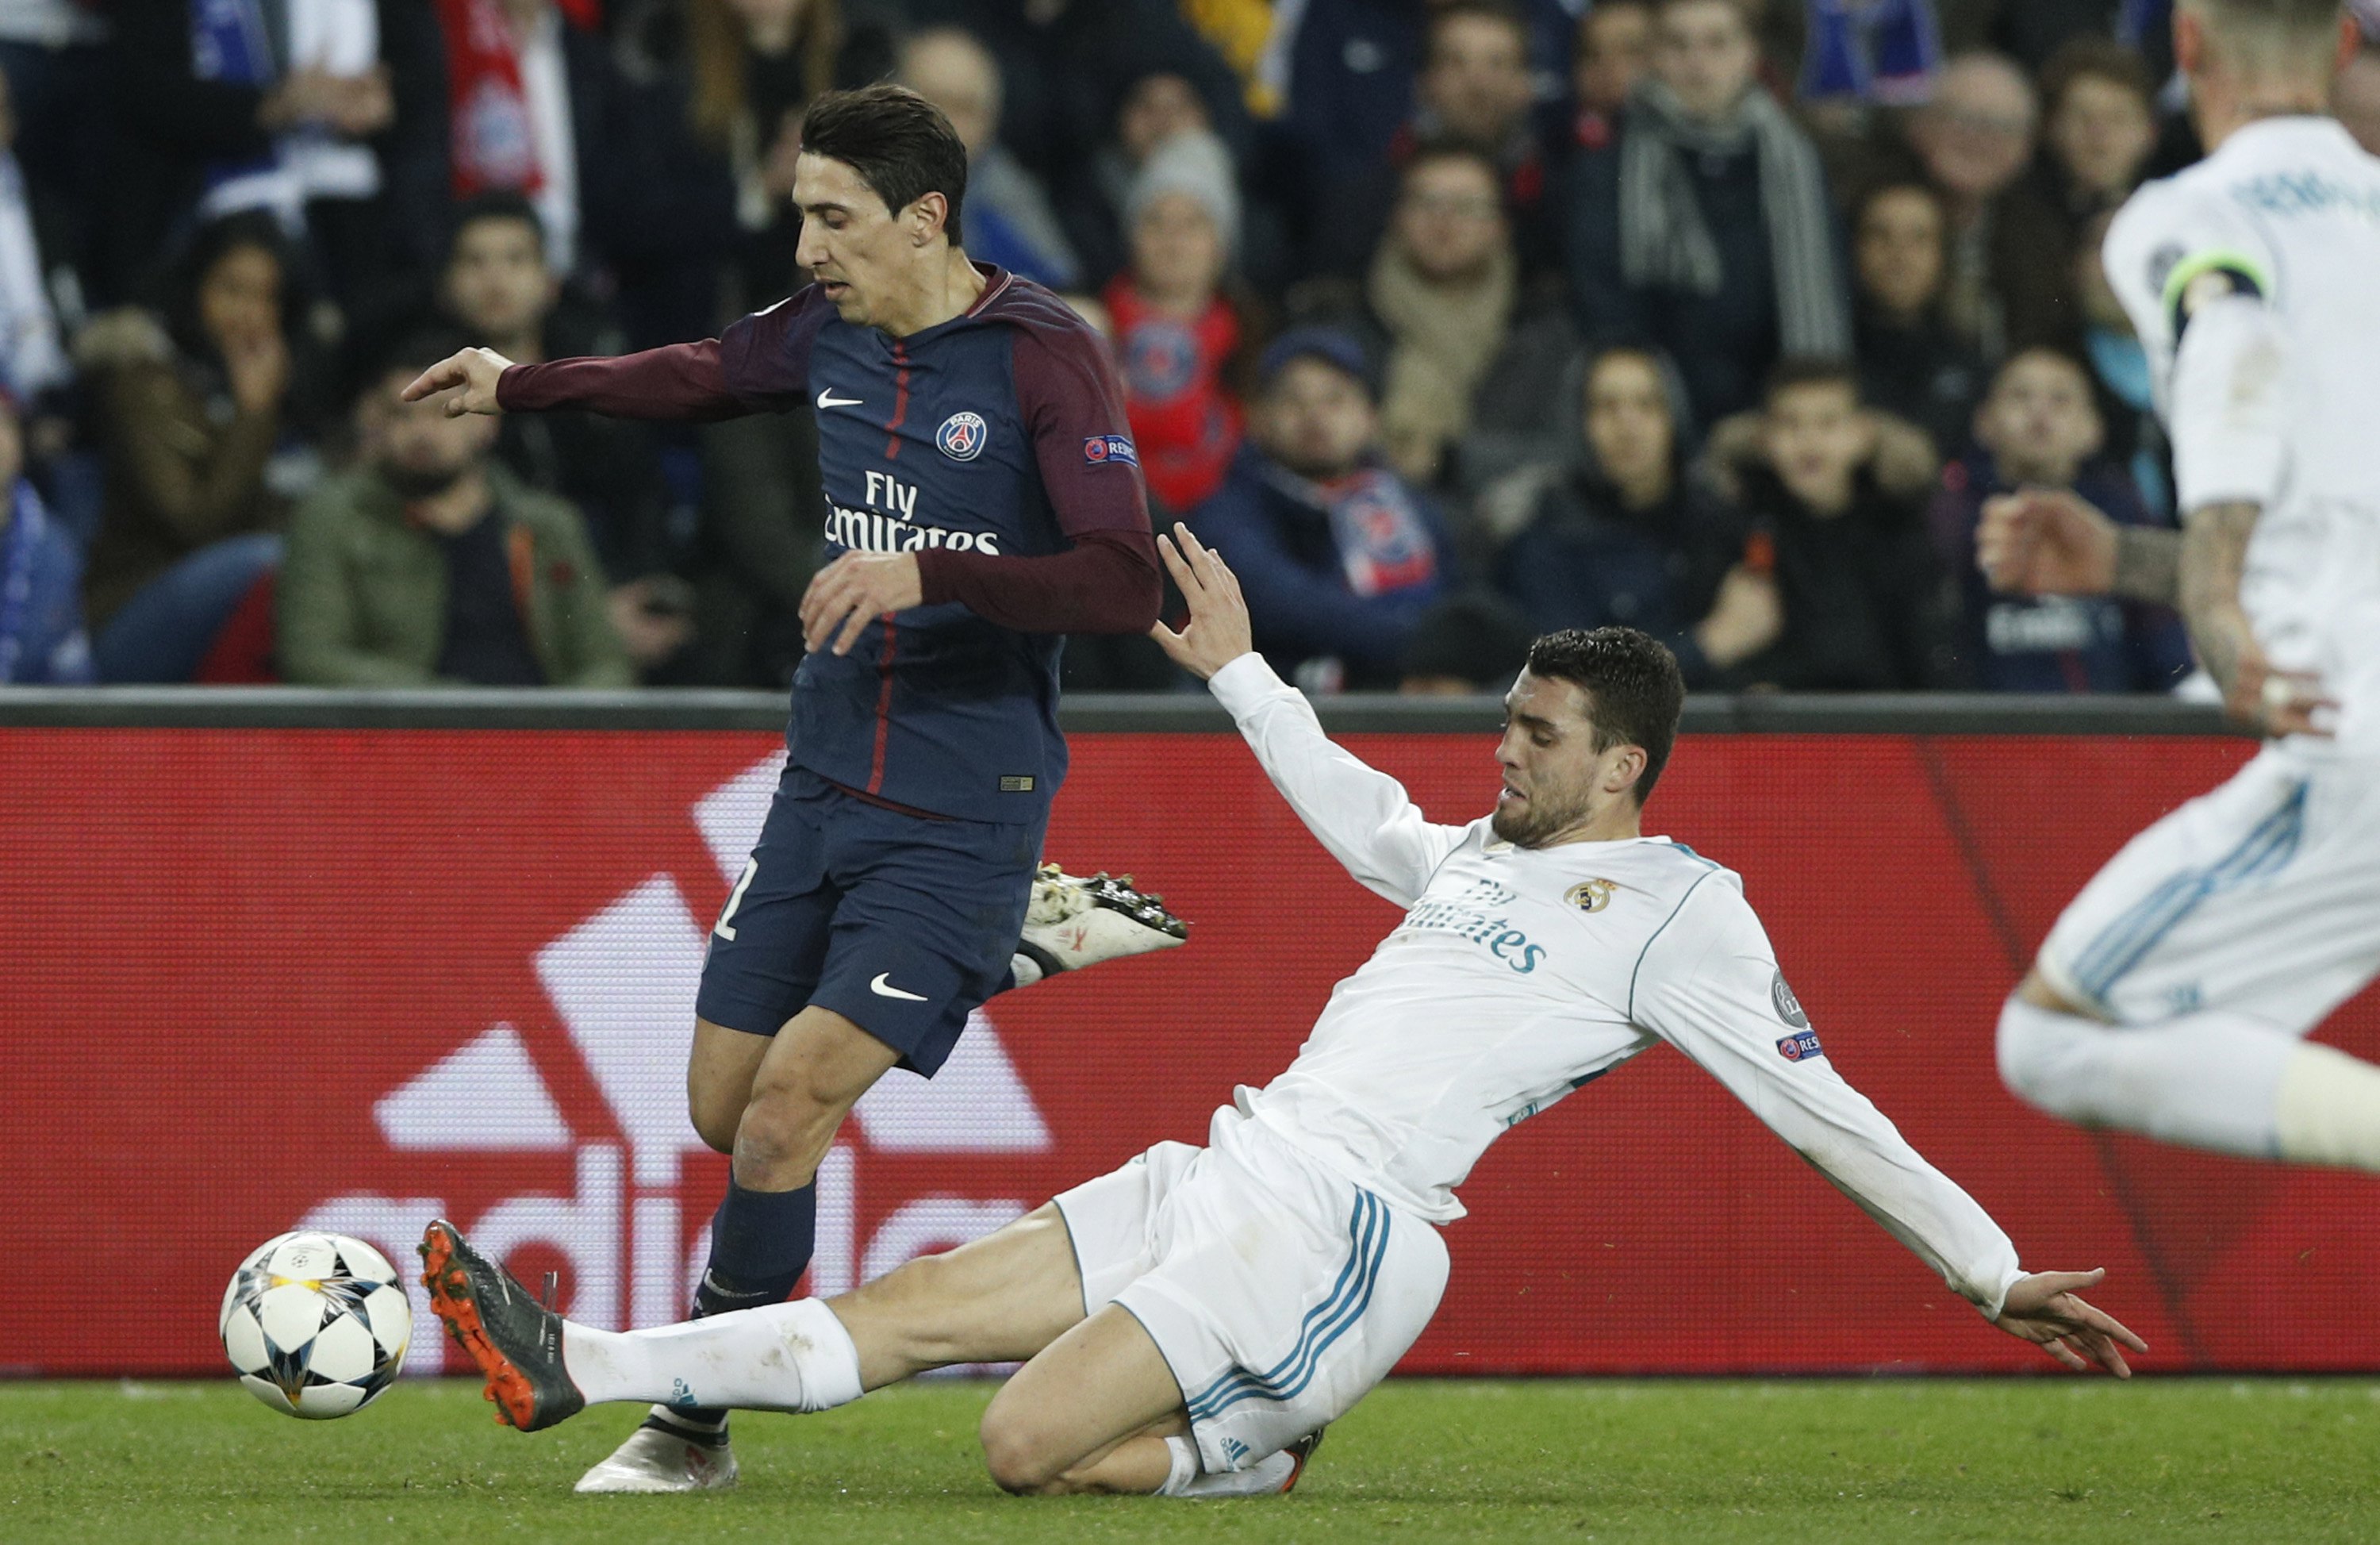 epa06585557 Paris Saint Germain's Angel Di Maria (L) and Real Madrid's Mateo Kovacic (R) in action during the UEFA Champions League round of 16, second leg soccer match between Paris Saint Germain and Real Madrid, in Paris, France, 06 March 2018.  EPA/YOAN VALAT